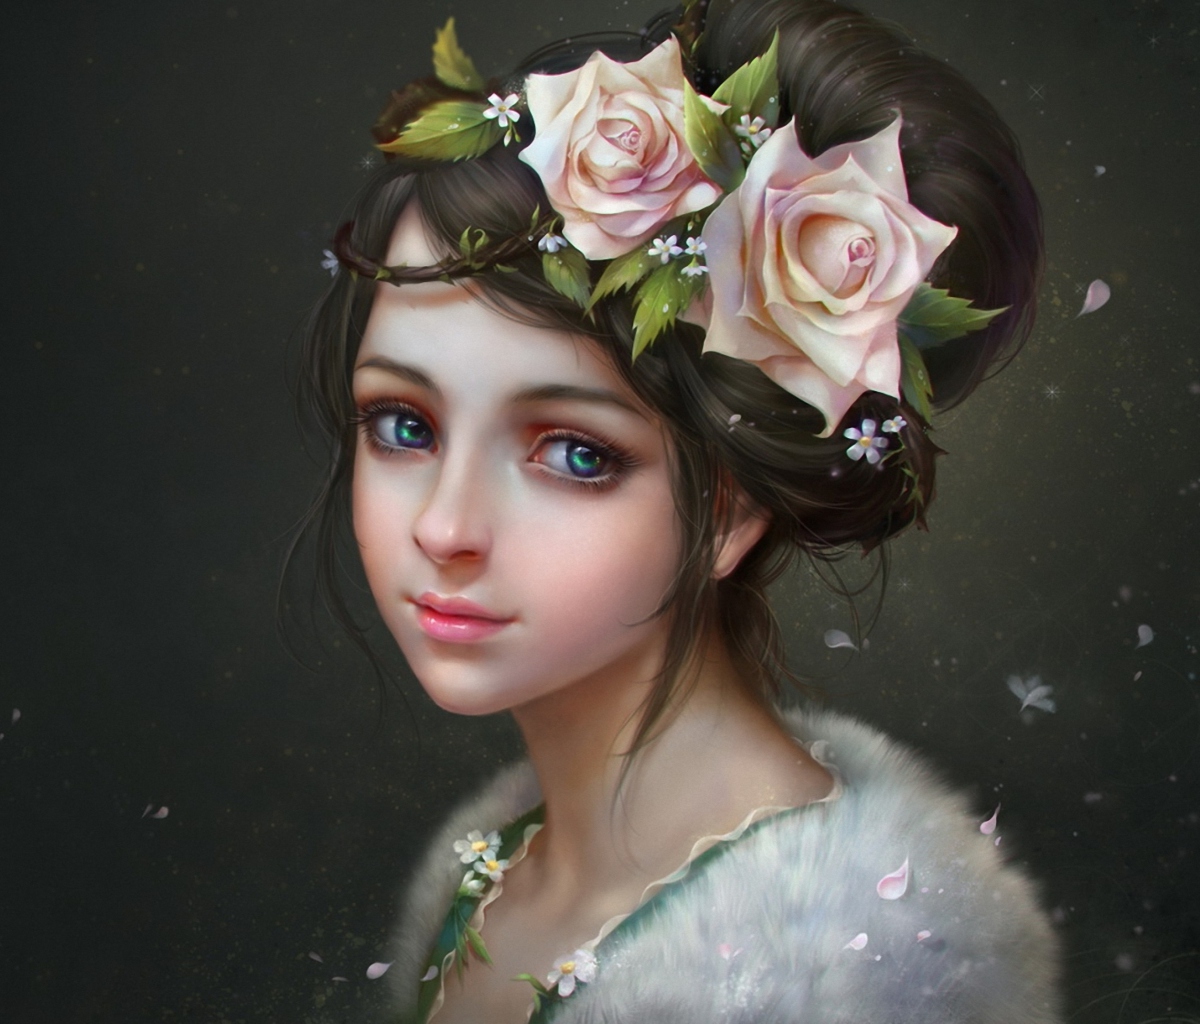 Girl With Roses In Her Hair Painting wallpaper 1200x1024